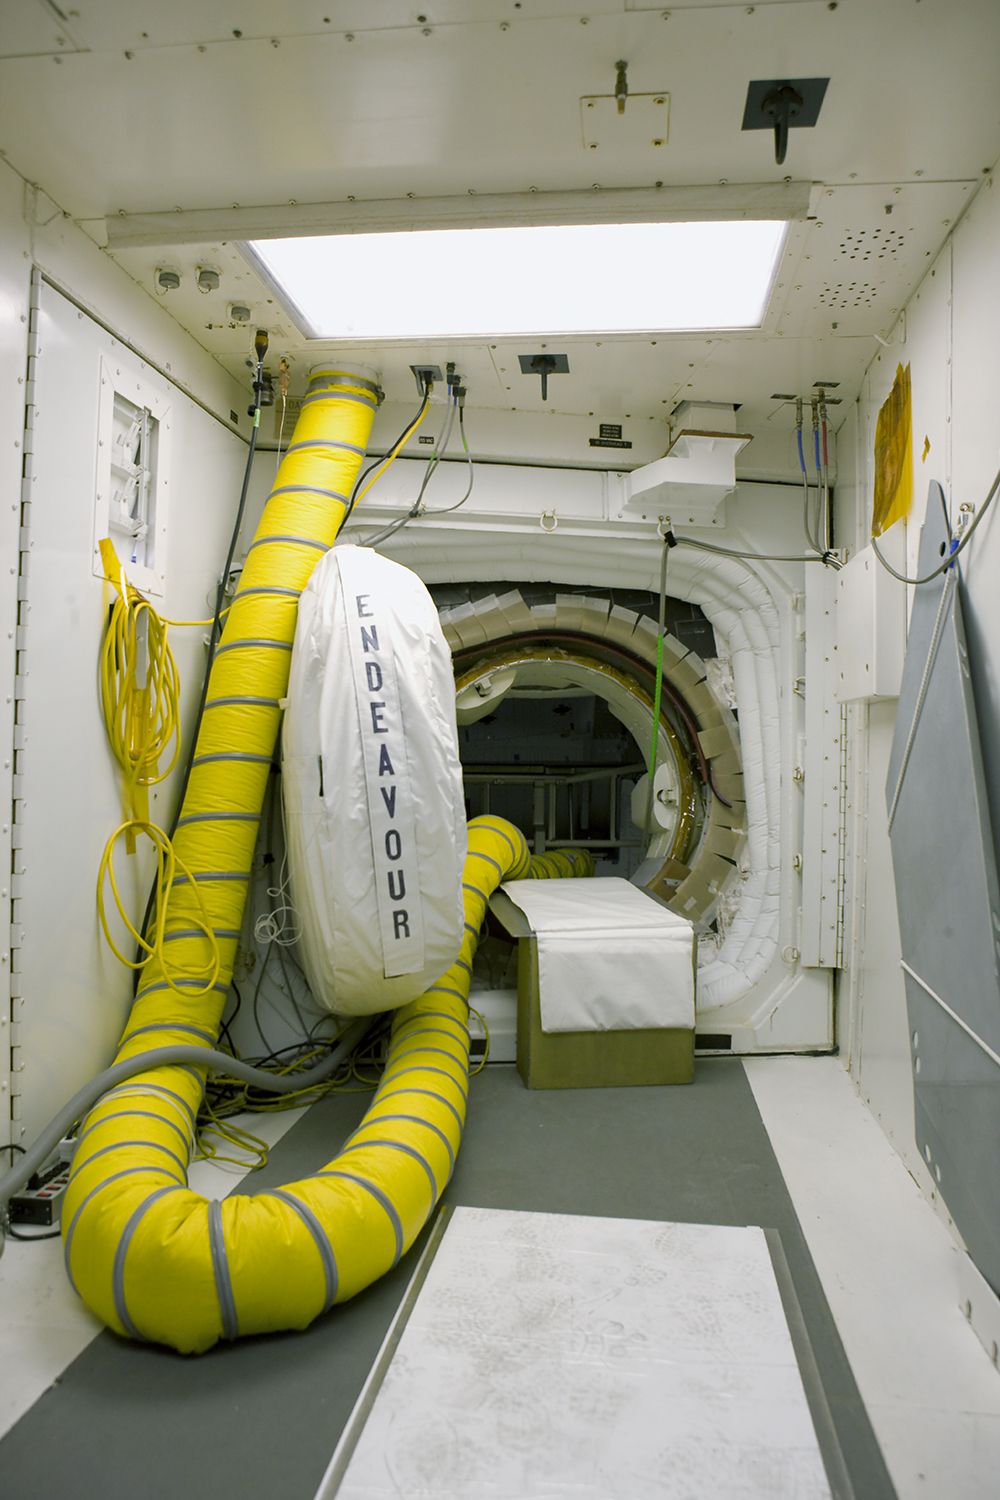 Space Shuttle Endeavour, White Room, Pad 39B